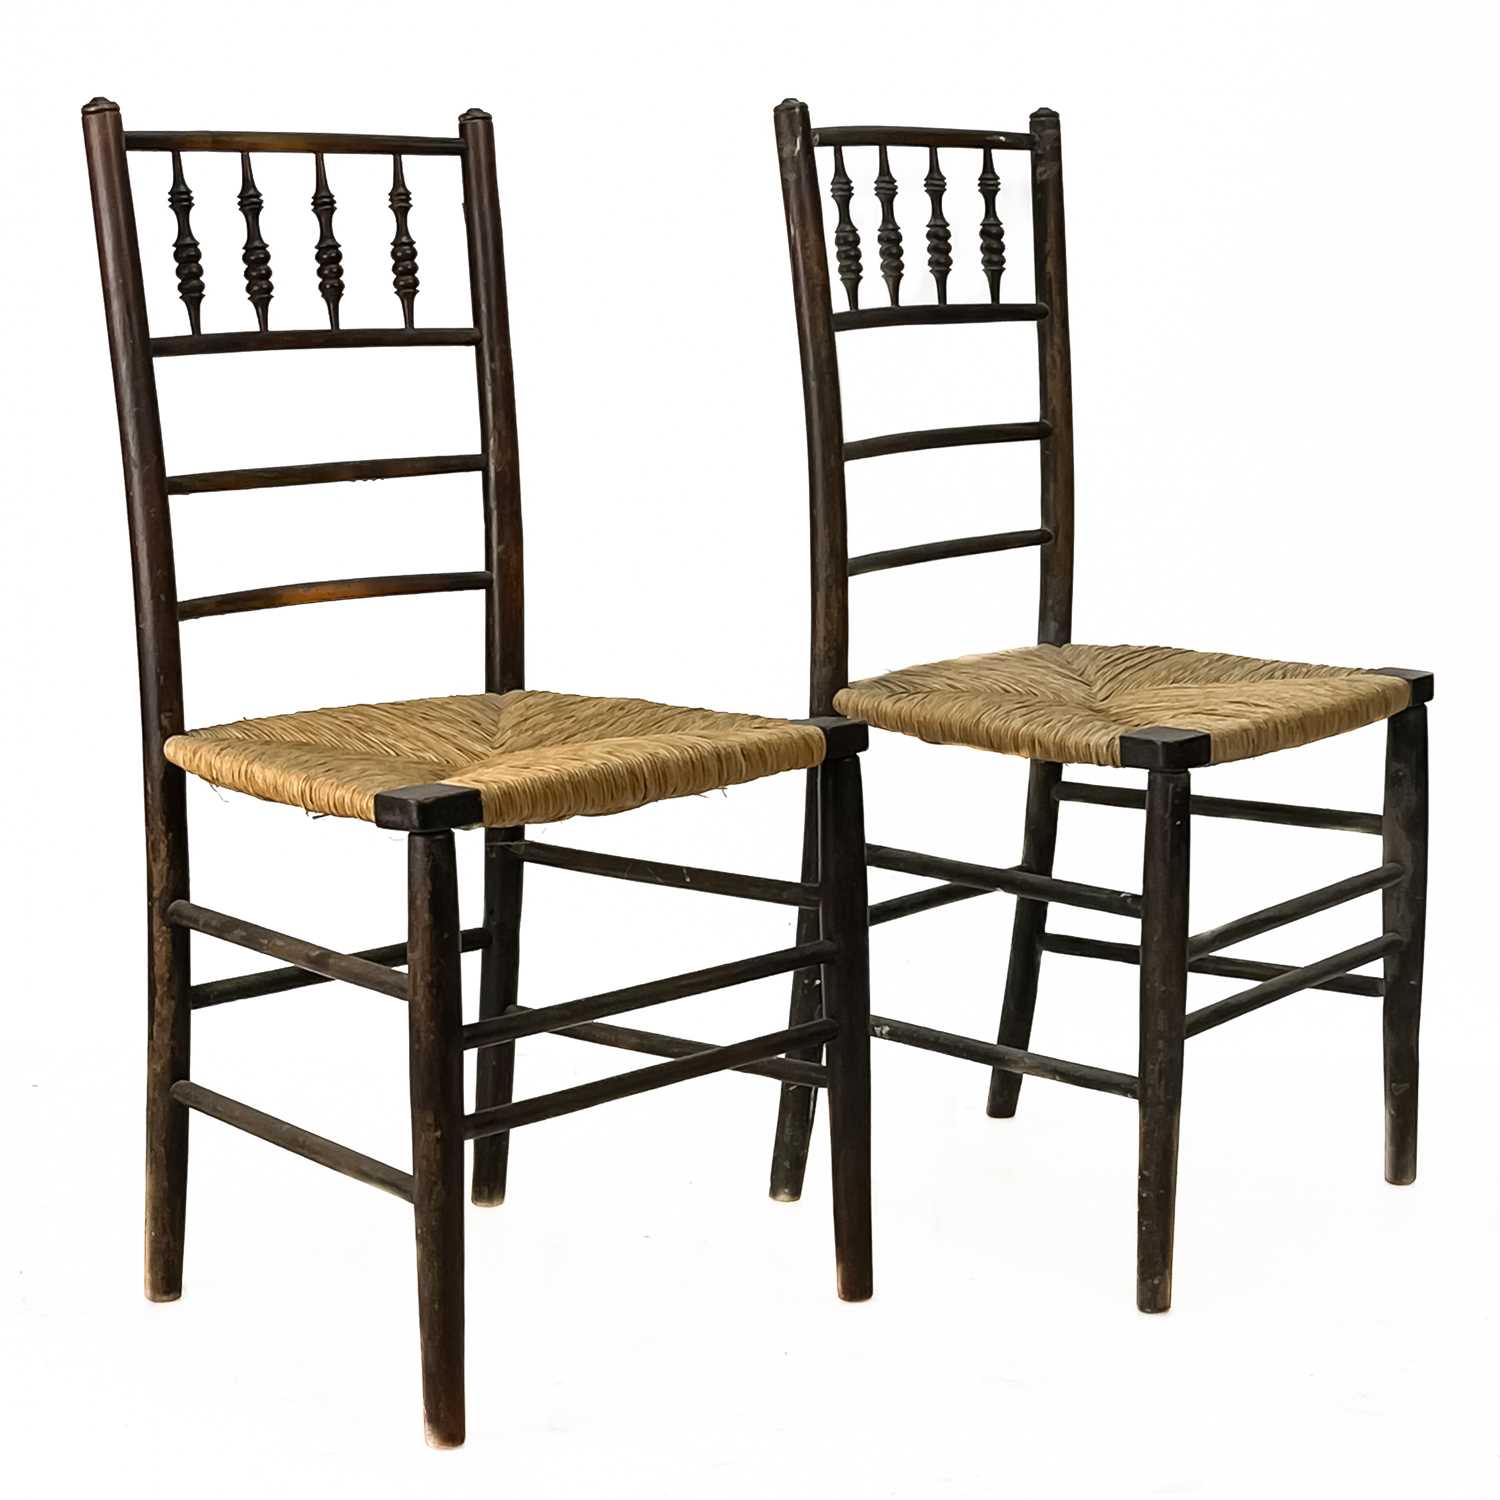 A pair of spindle back rush seat chairs.